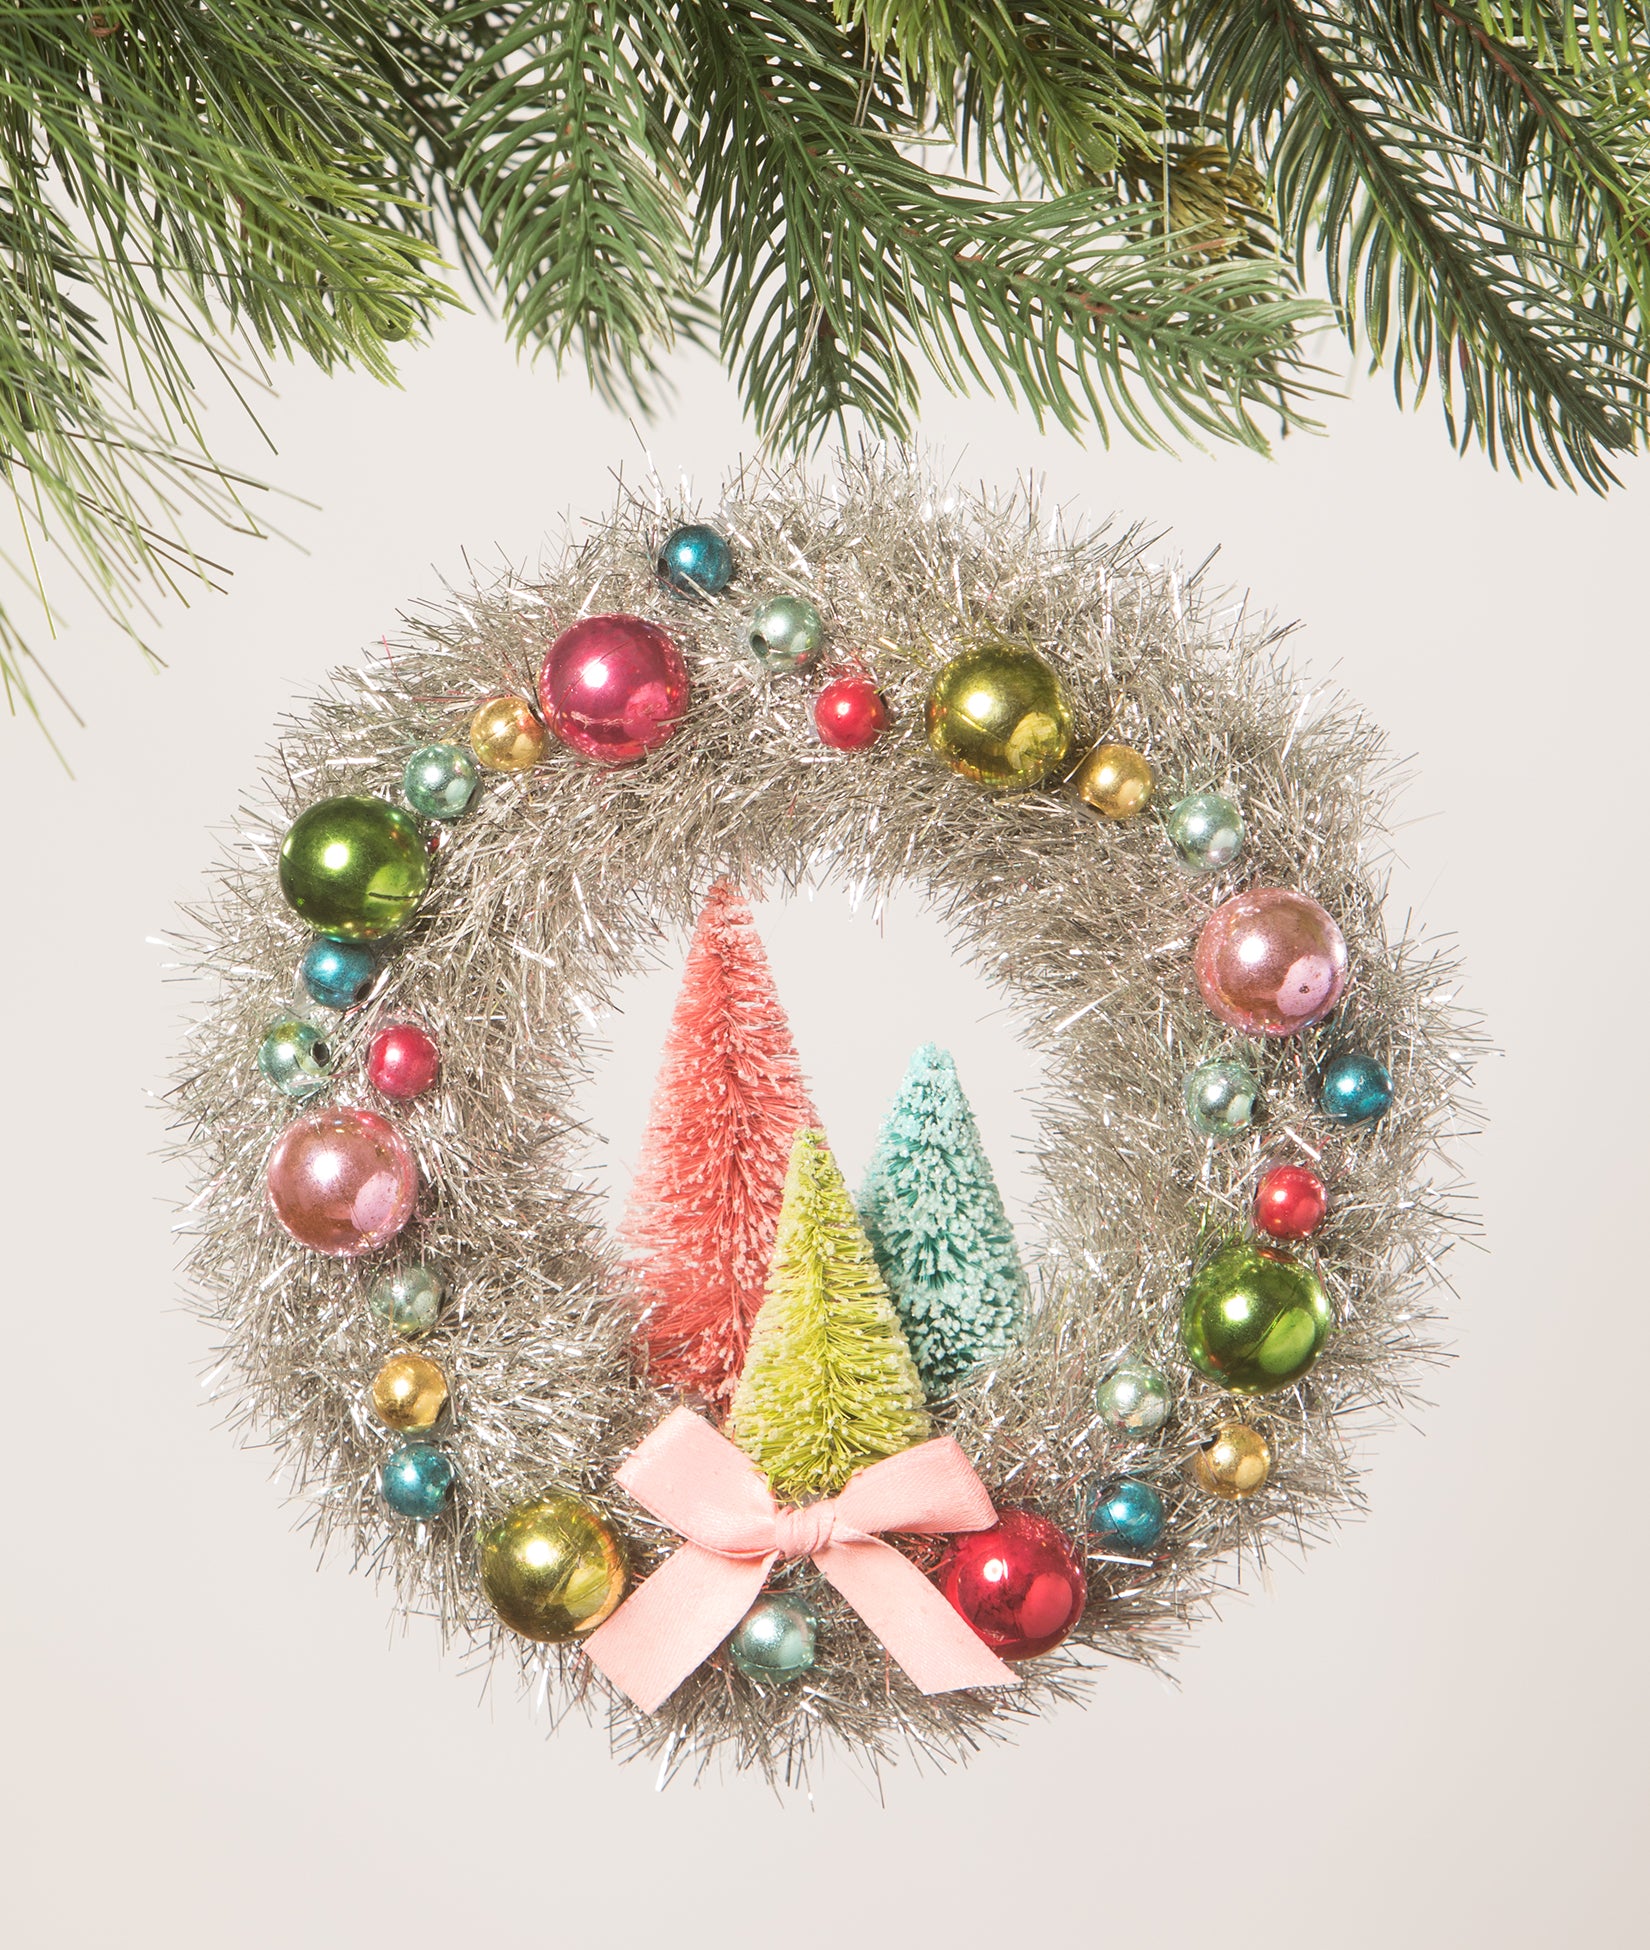 Christmas_Bethany Lowe_Bright_Colorful_Wreath_Ornament